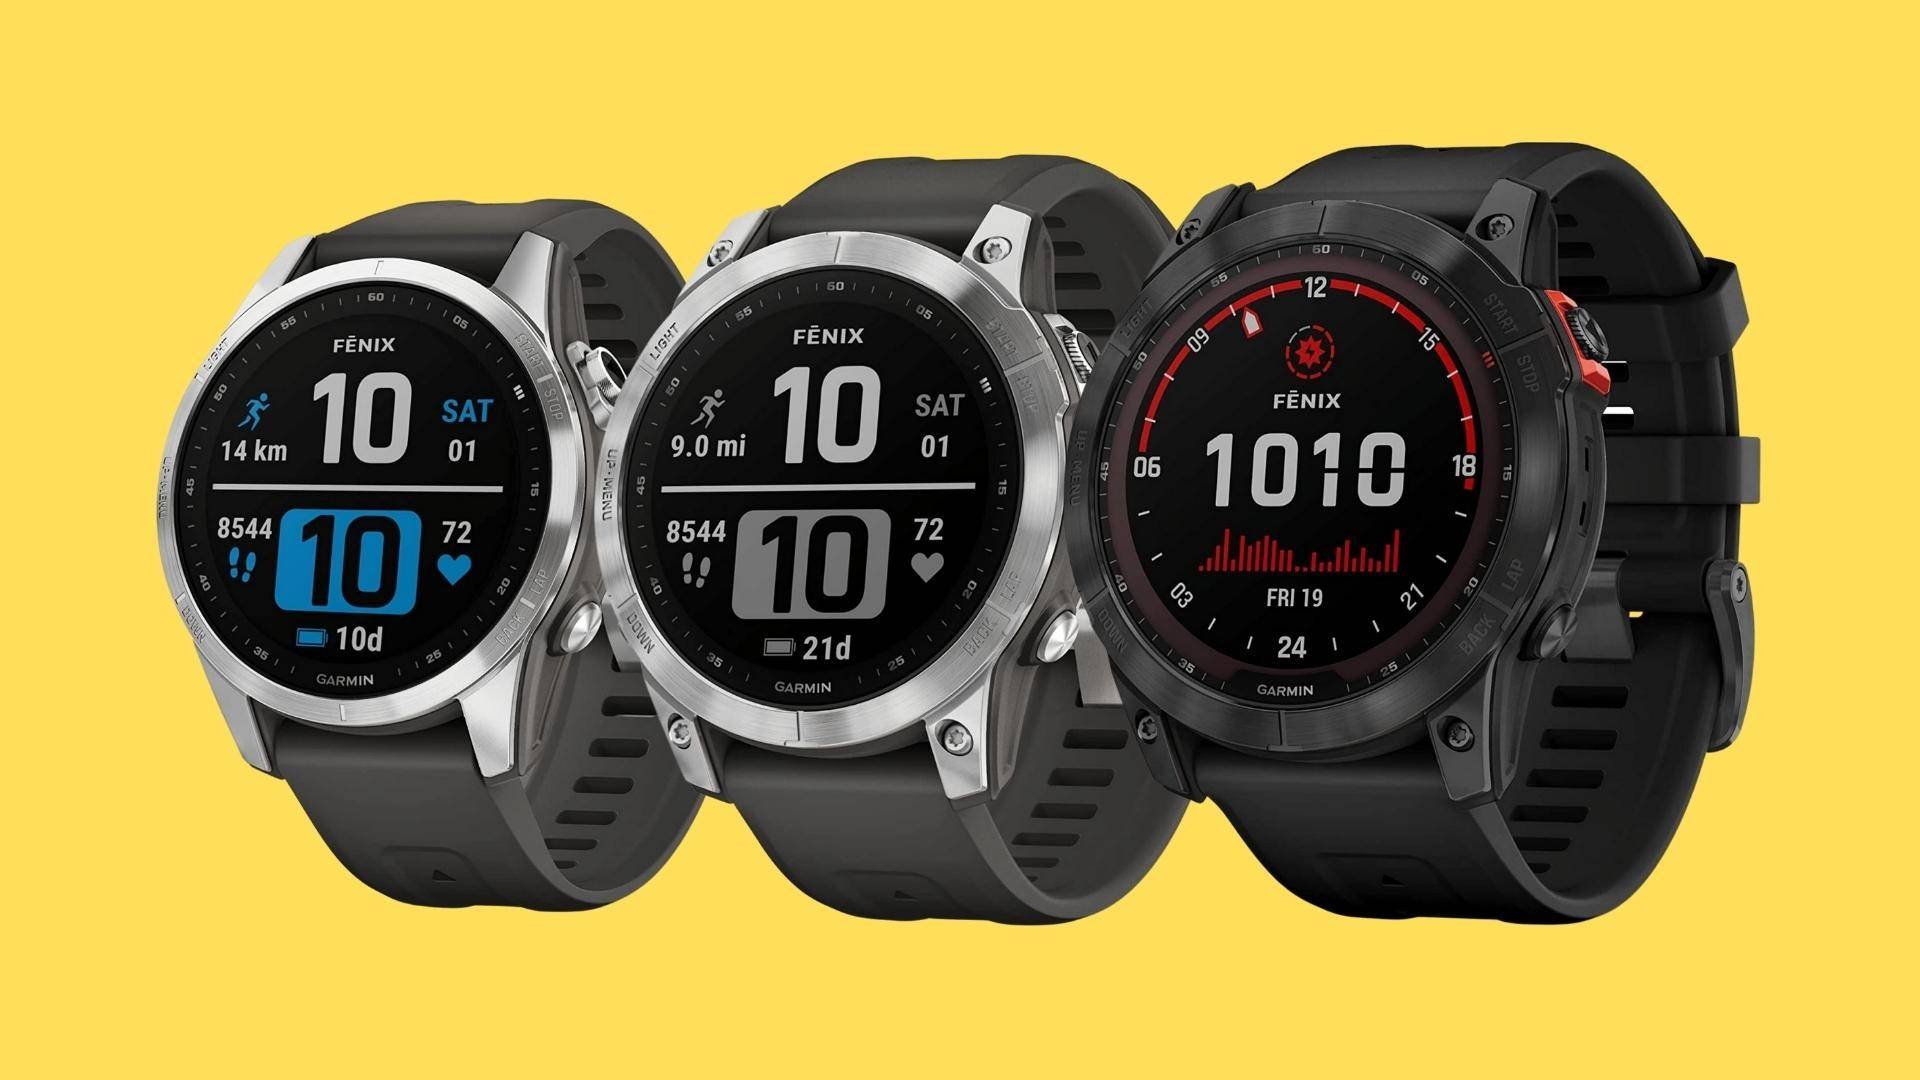 An image showcasing the Fenix 7 series and its various models